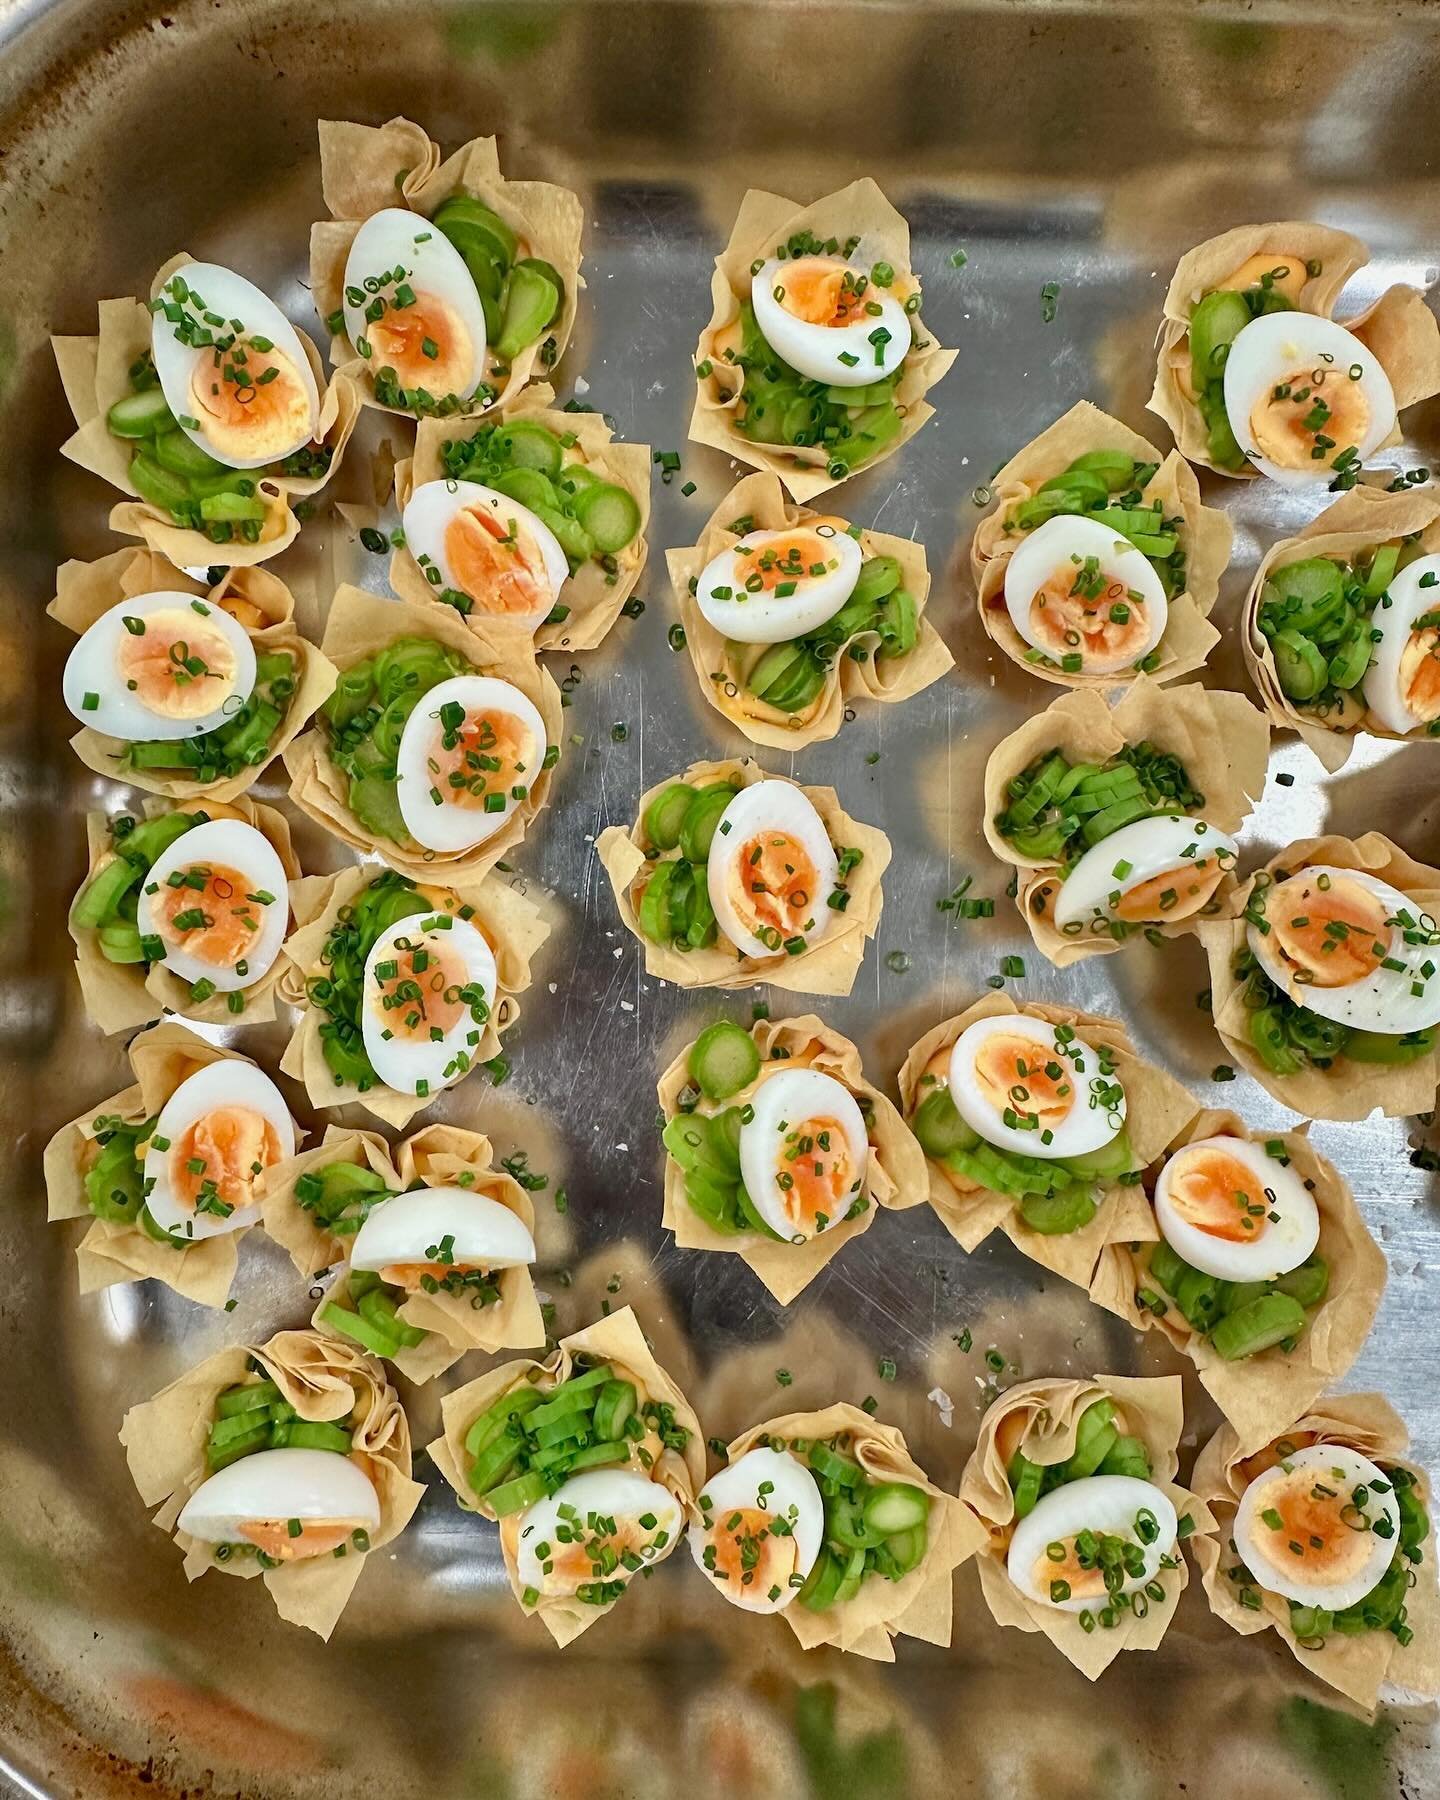 Welcoming back asparagus, we&rsquo;re very happy to see you! 

Quails egg, asparagus, hollandaise &amp; chive filo tarts waiting to be served.